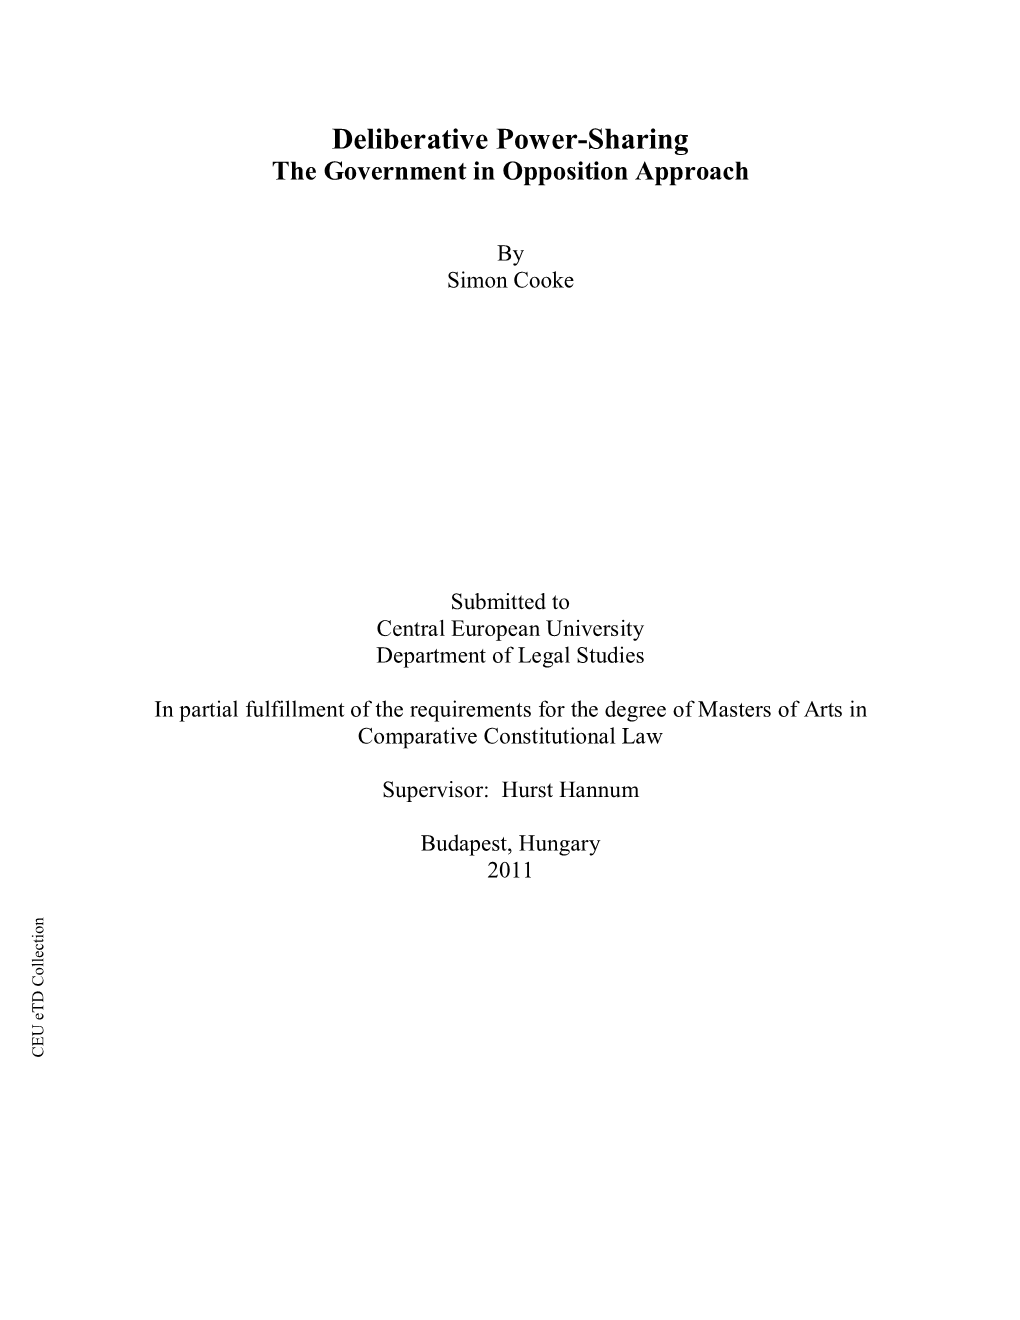 Deliberative Power-Sharing: the Government in Opposition Approach